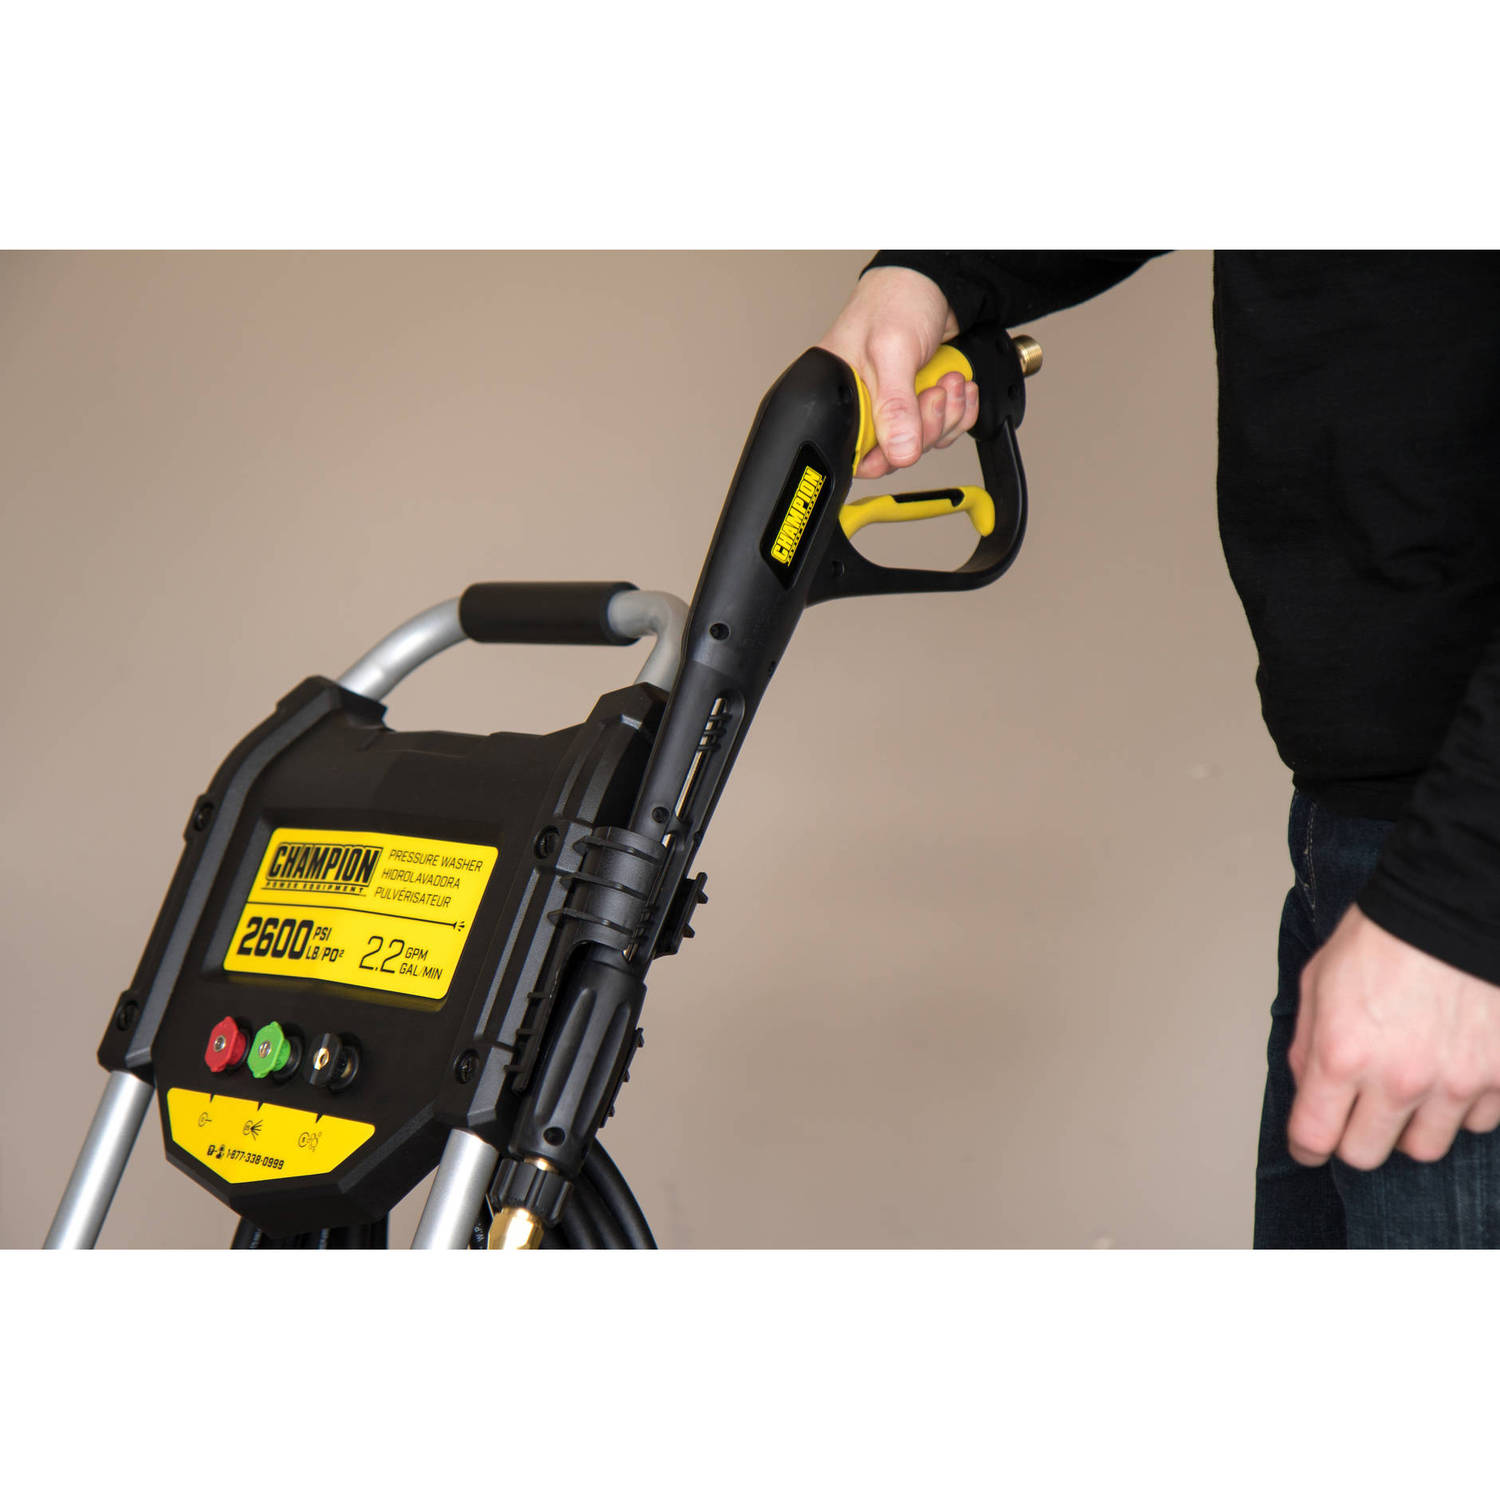 Champion 2600-PSI 2.2-GPM Dolly-Style Gas Pressure Washer - image 2 of 7